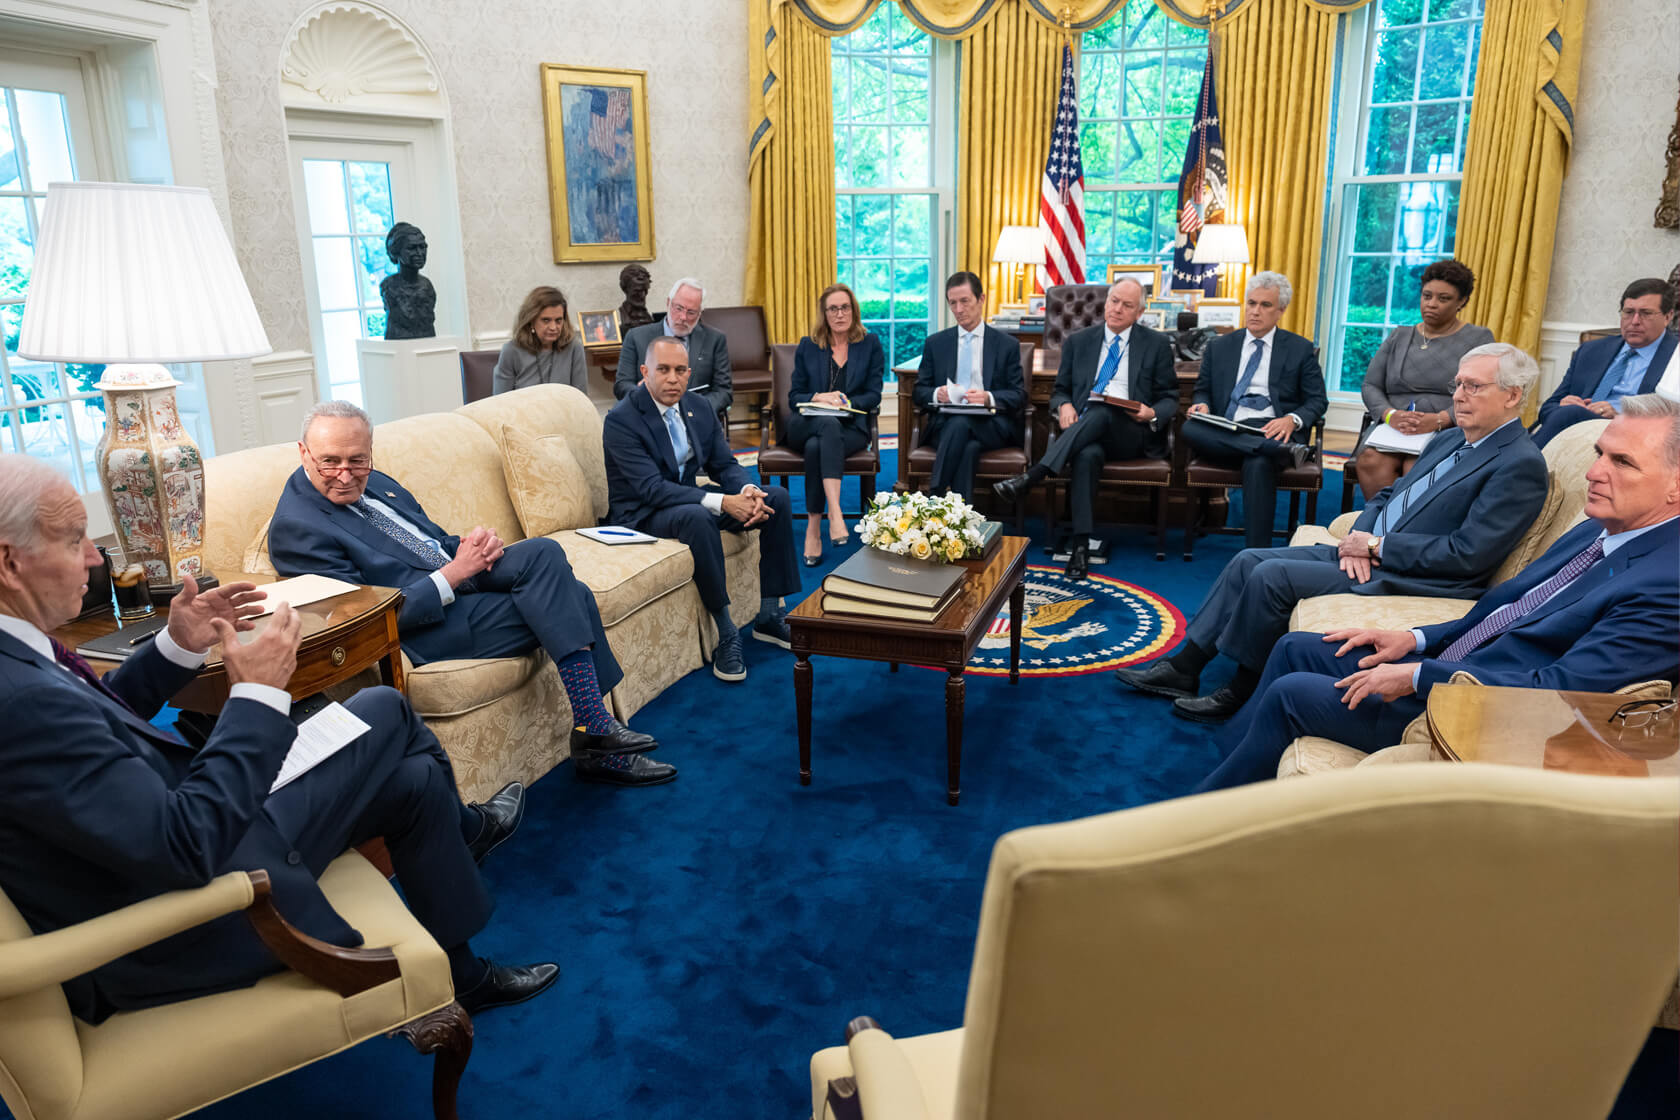 Image of debt deal meeting in oval office.